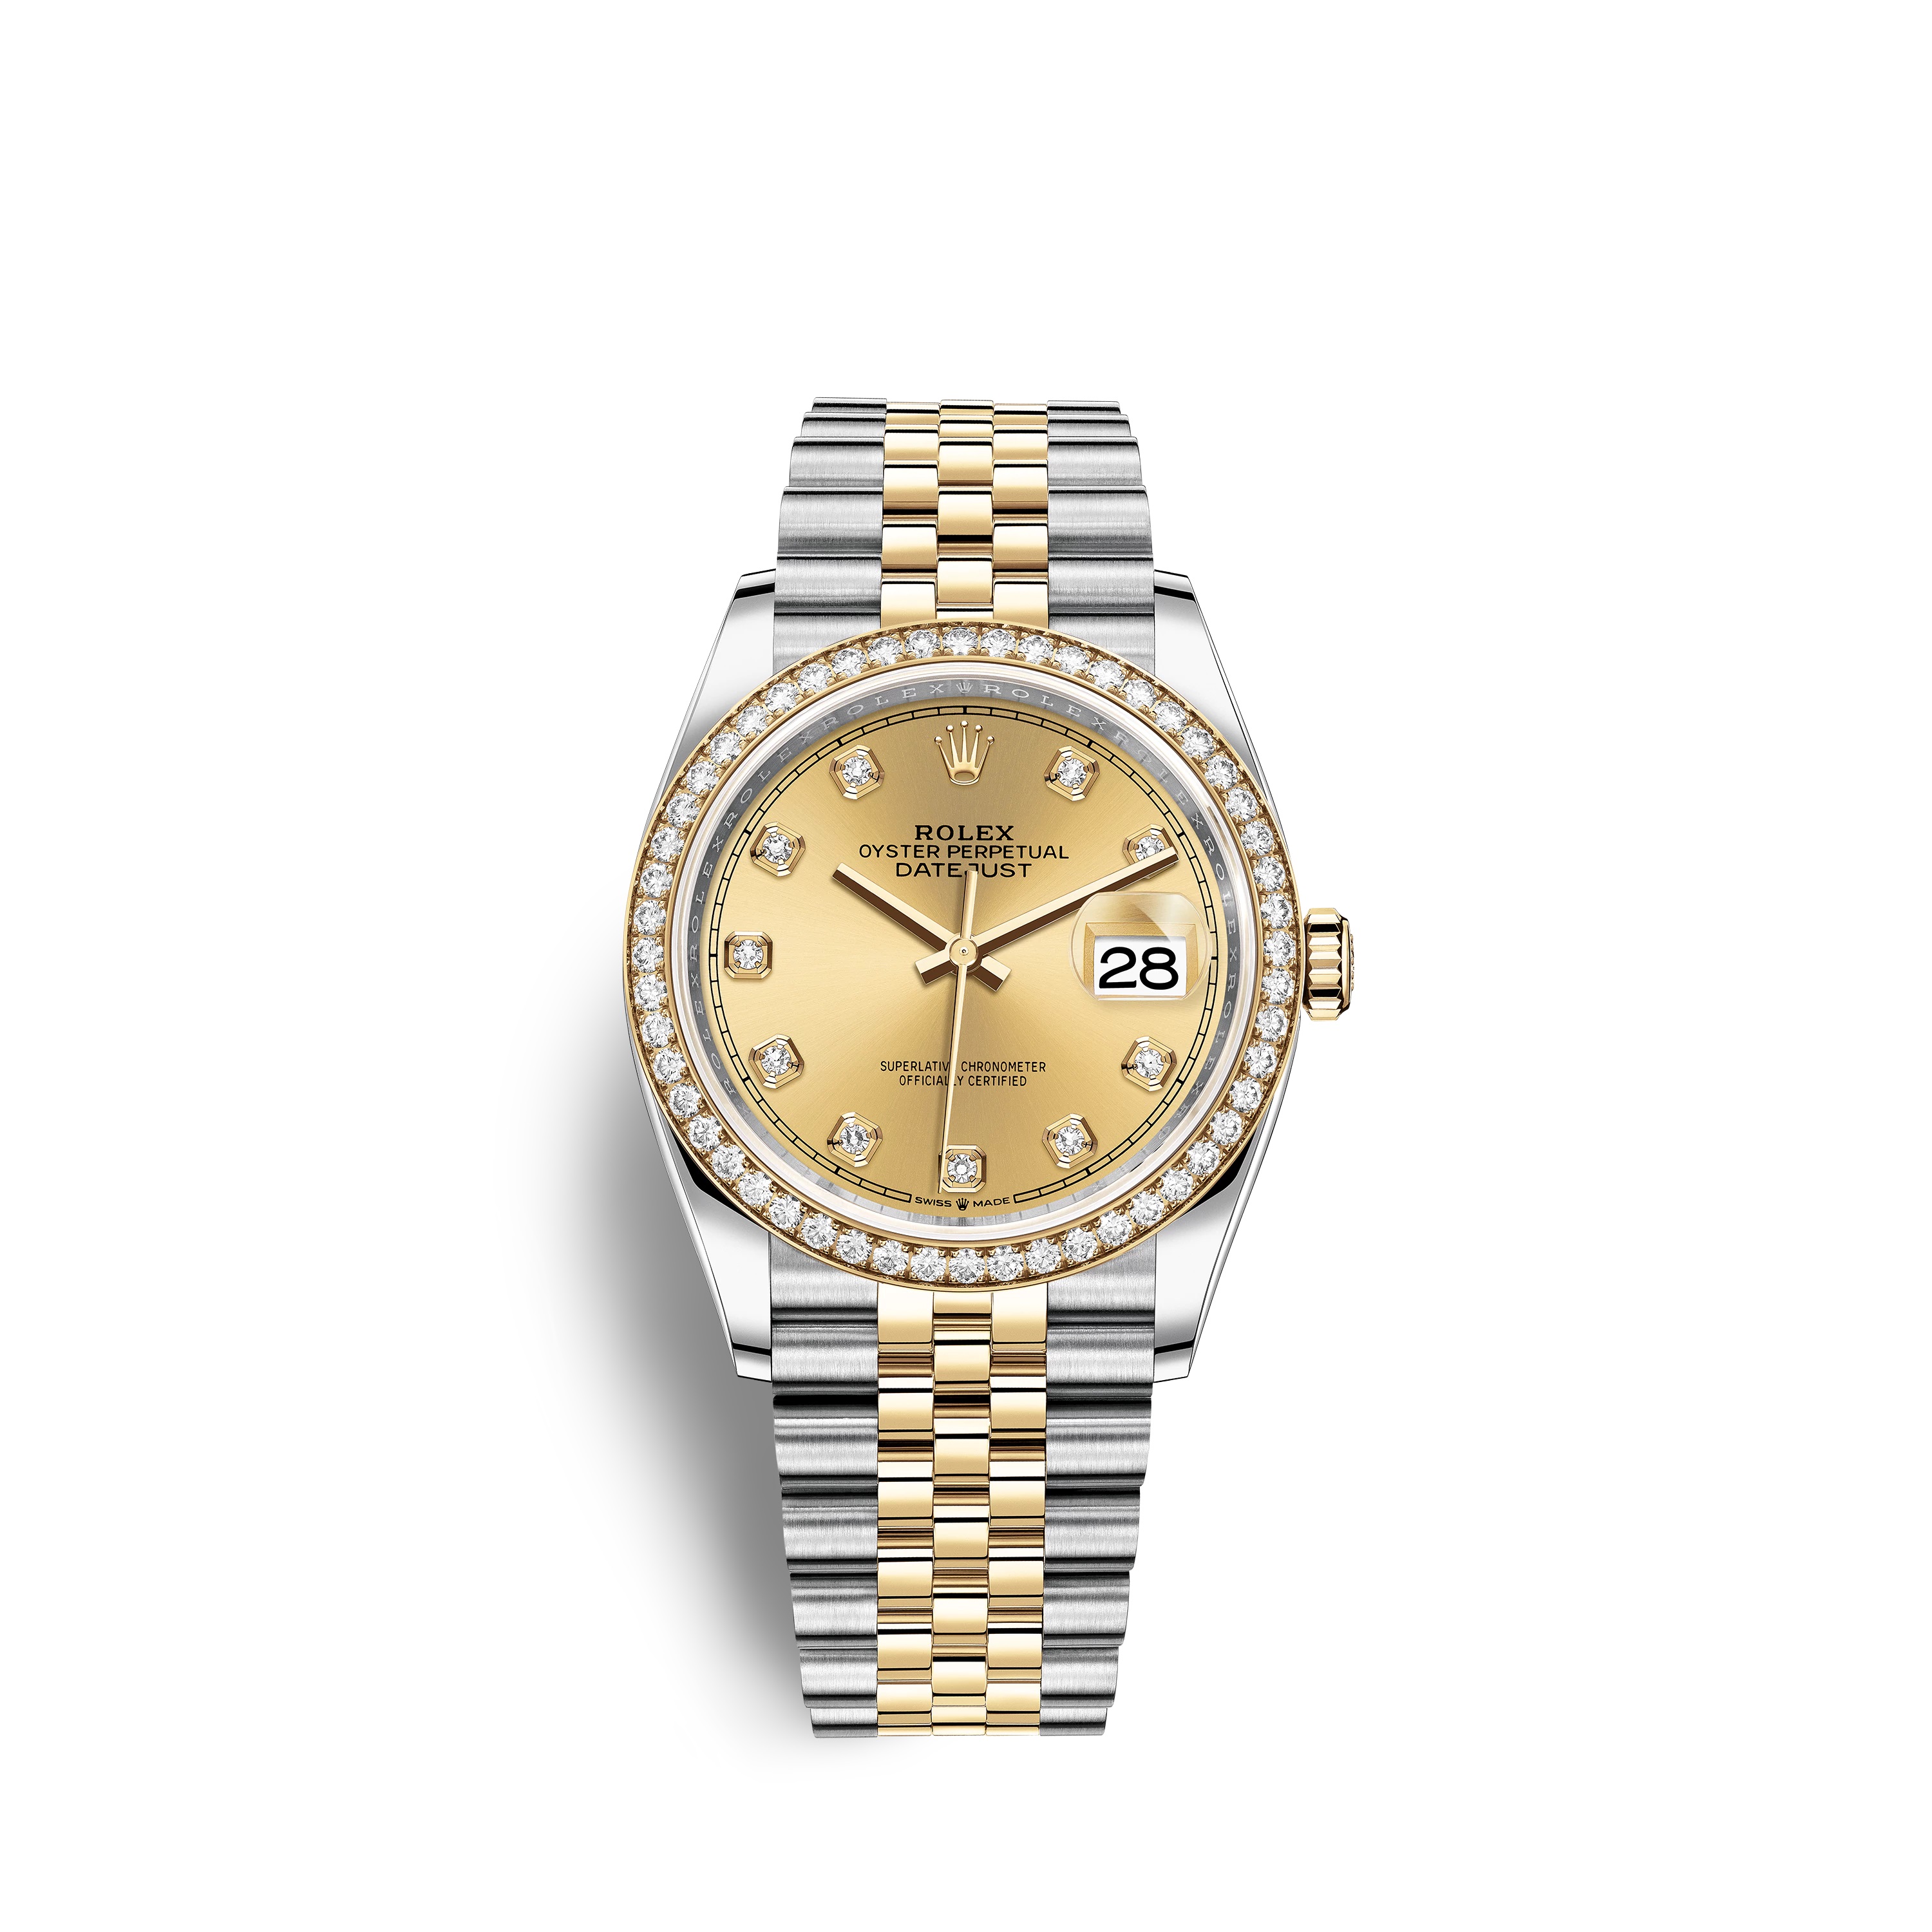 Datejust 36 126283RBR Gold & Stainless Steel Watch (Champagne-Colour Set with Diamonds)